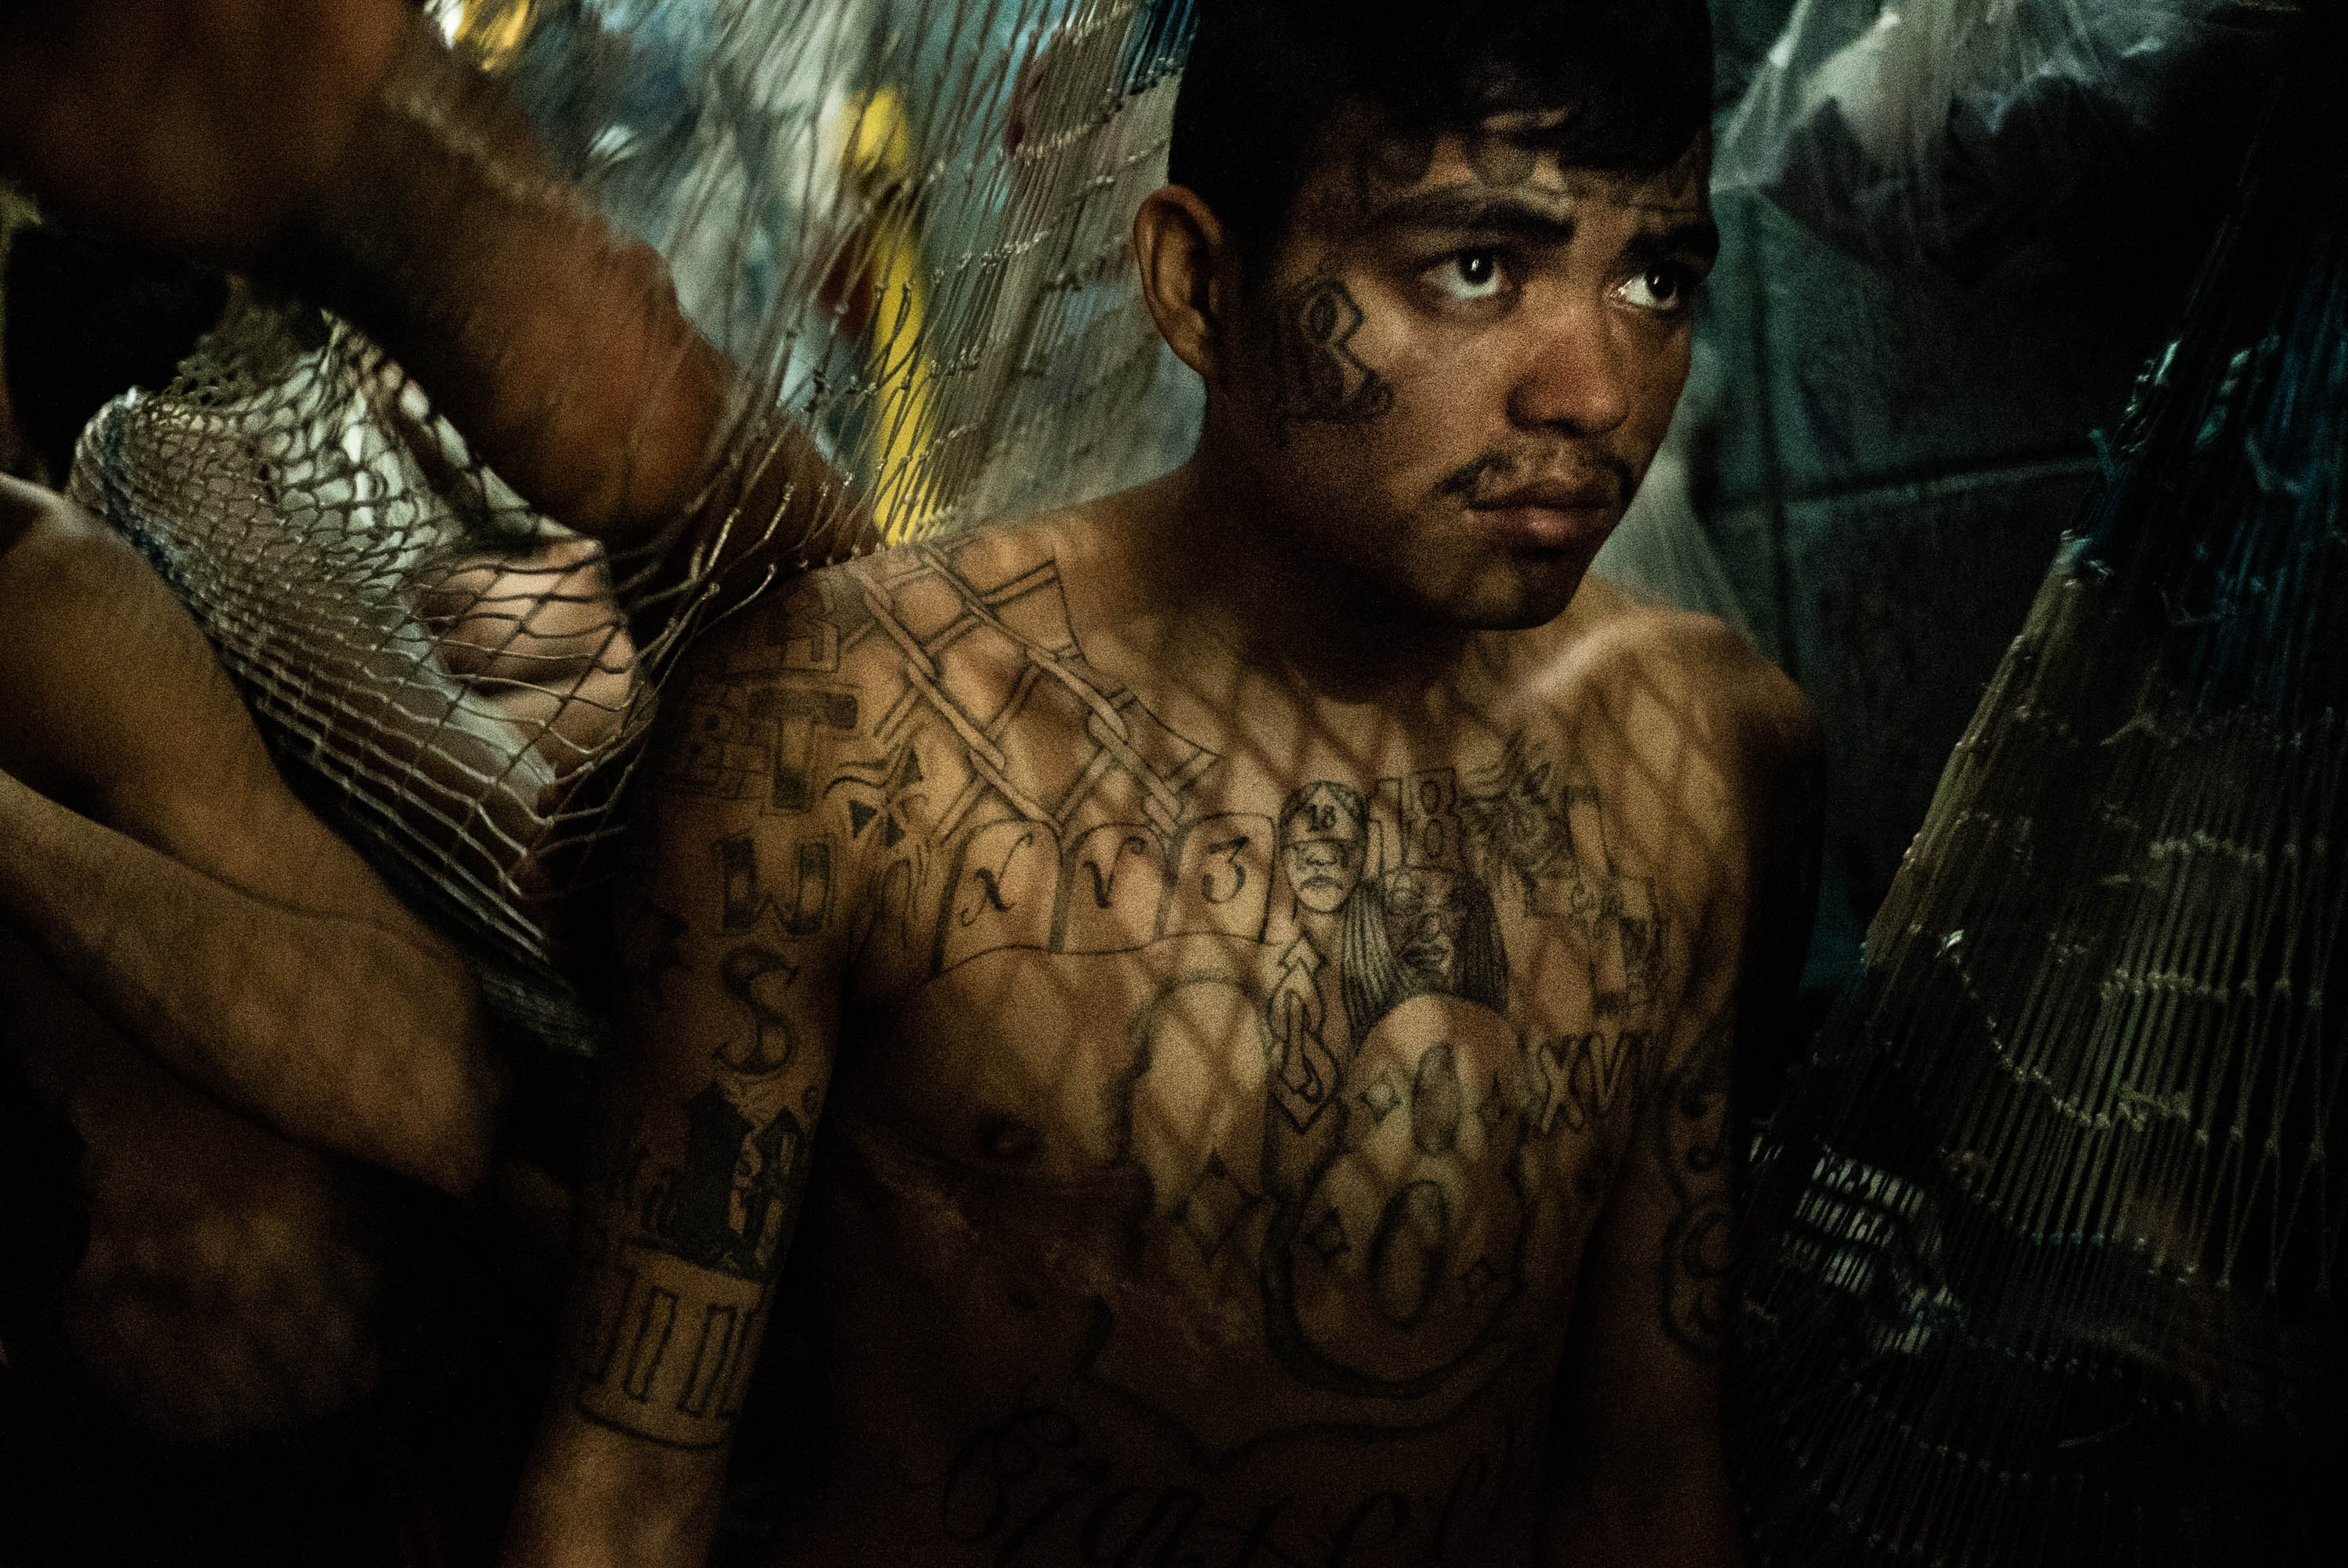 A suspected gang member in a crowded jail in San Salvador. (Patrick Tombola—Laif)